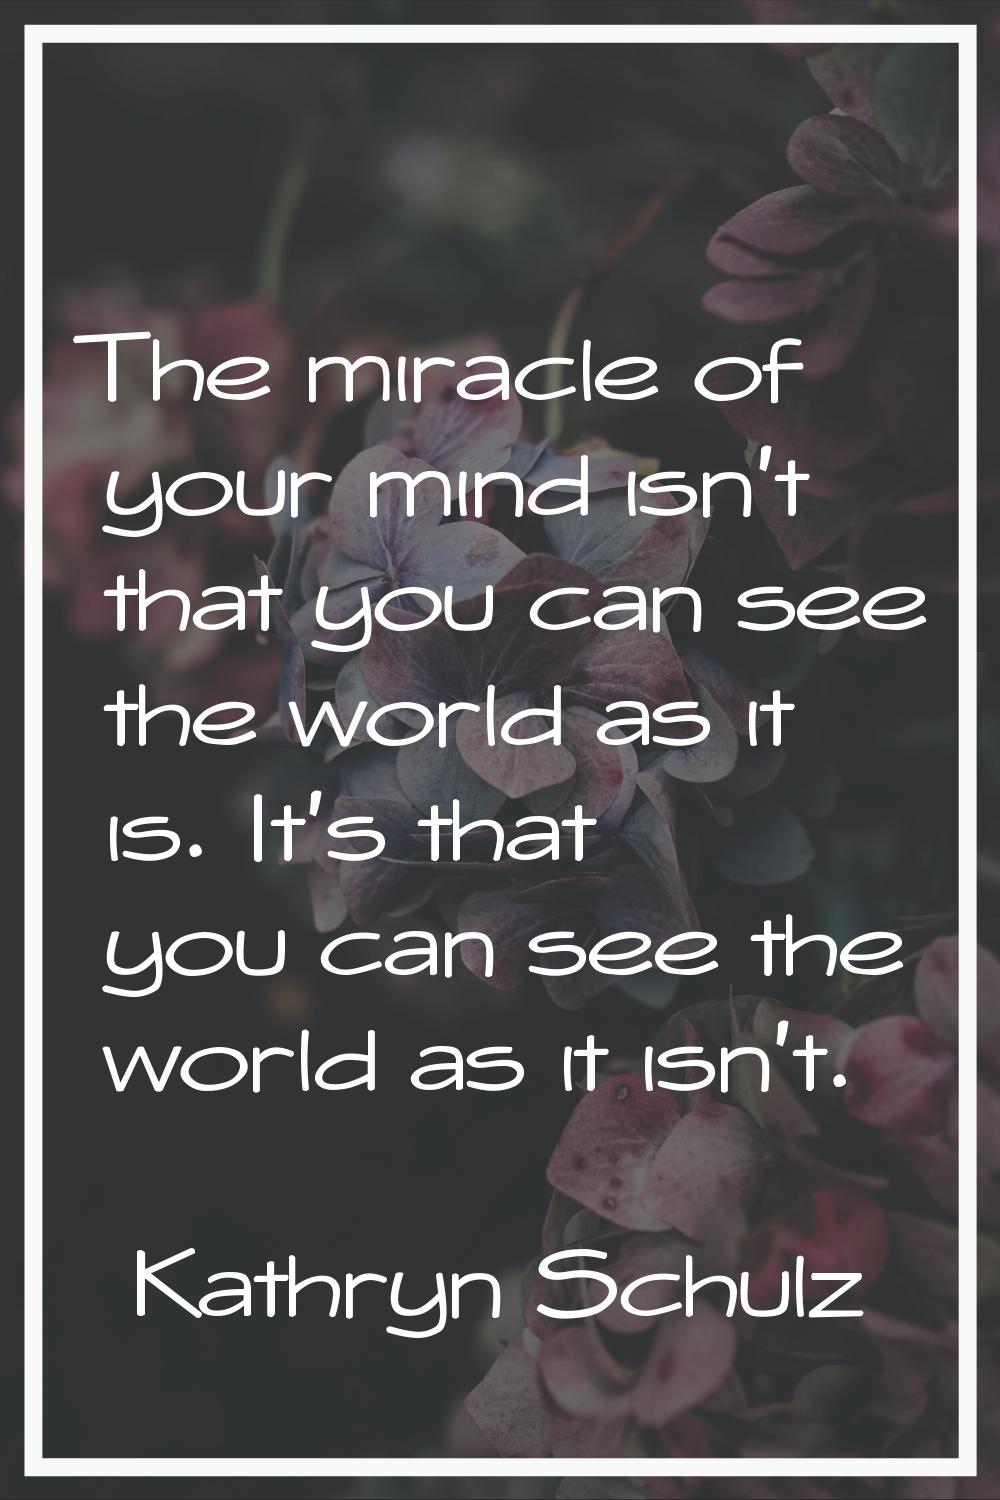 The miracle of your mind isn't that you can see the world as it is. It's that you can see the world